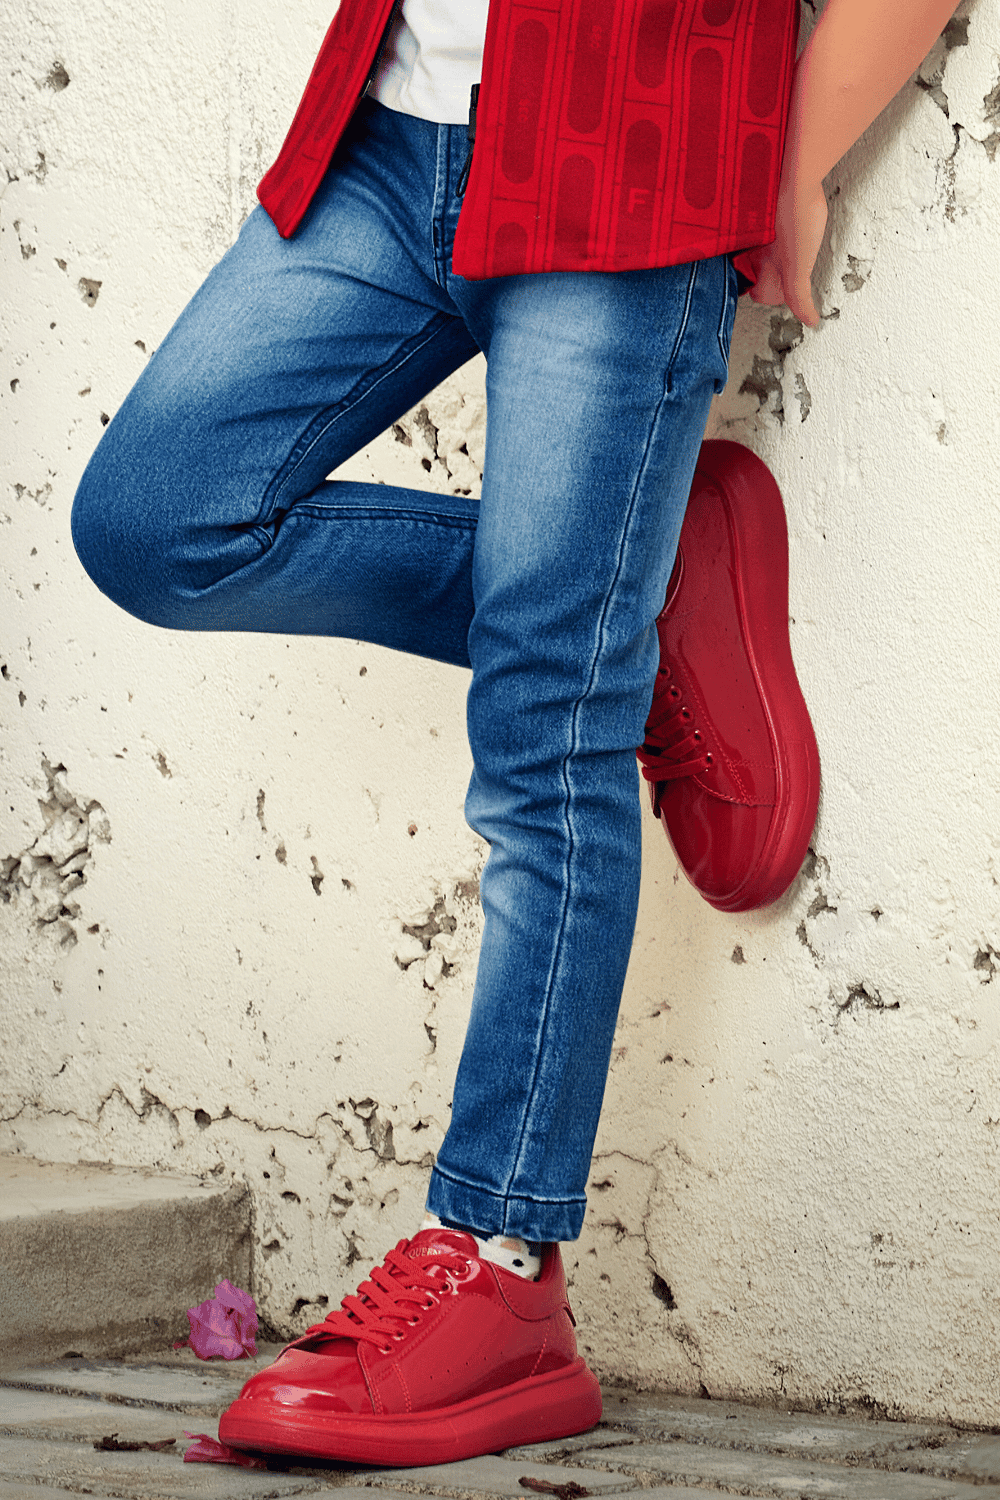 Red and White with Denim Blue Waist Coat and Set for Boys with Belt - Seasons Chennai